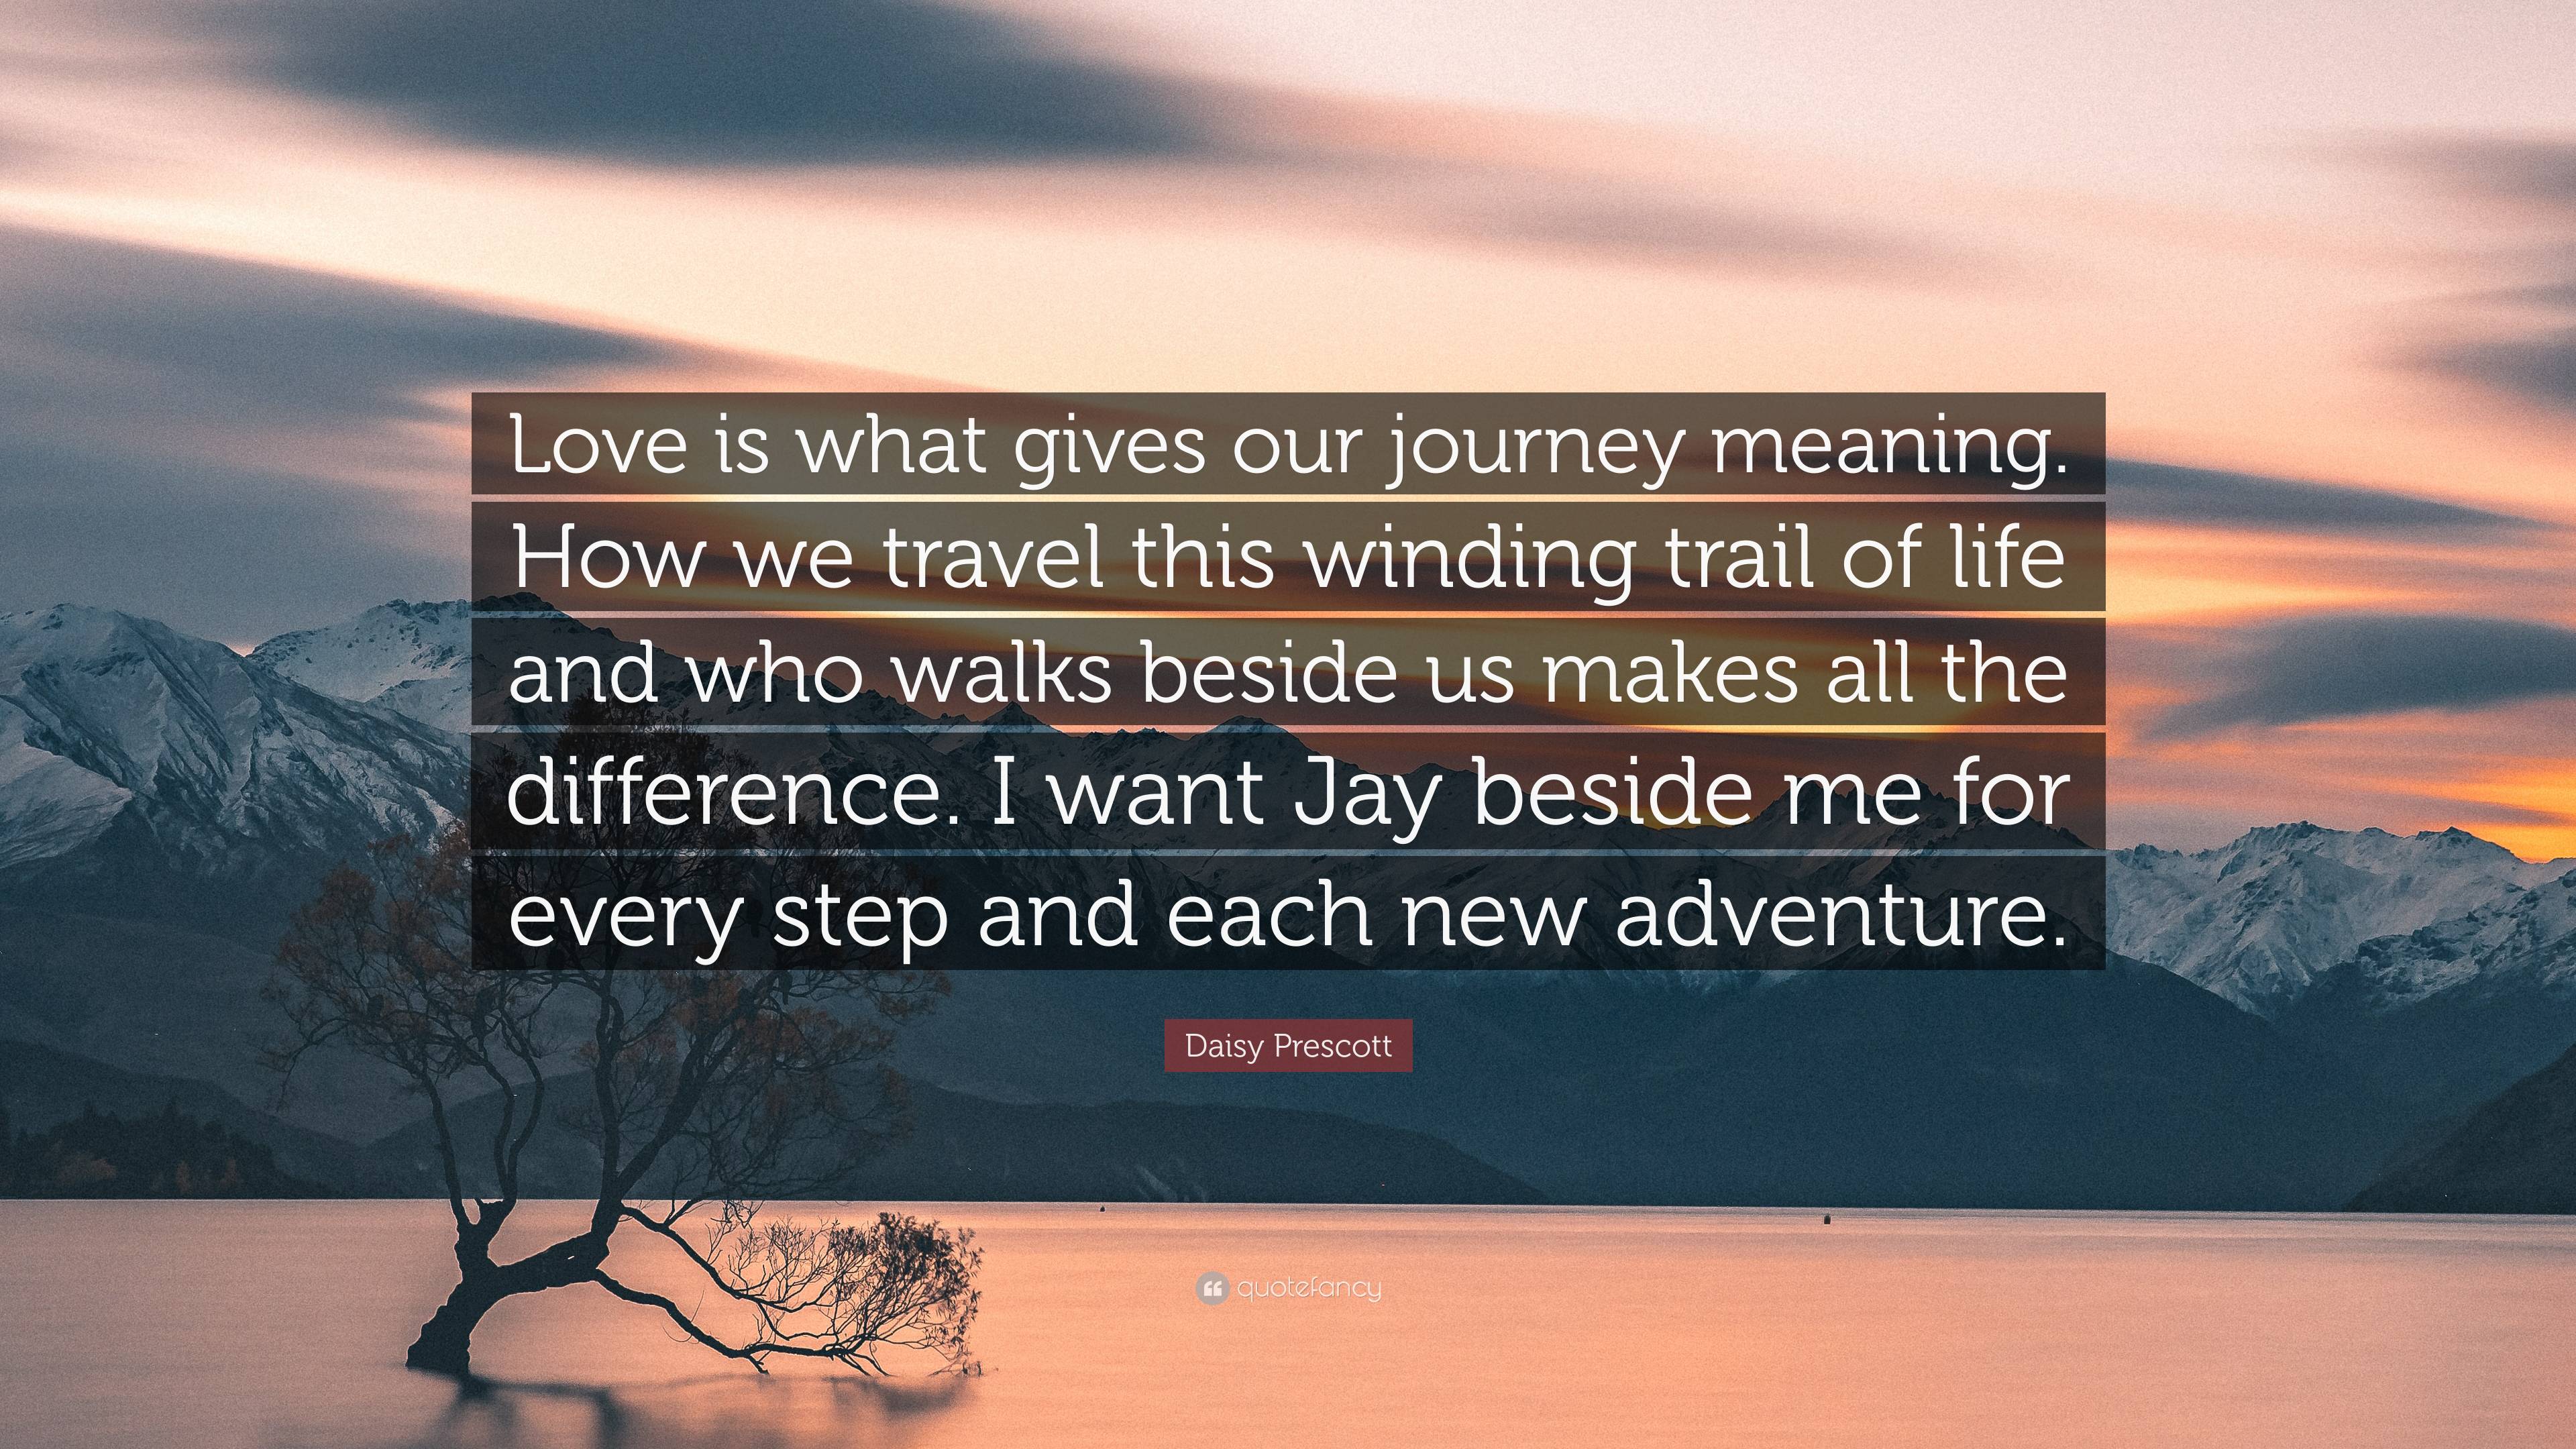 a journey meaning